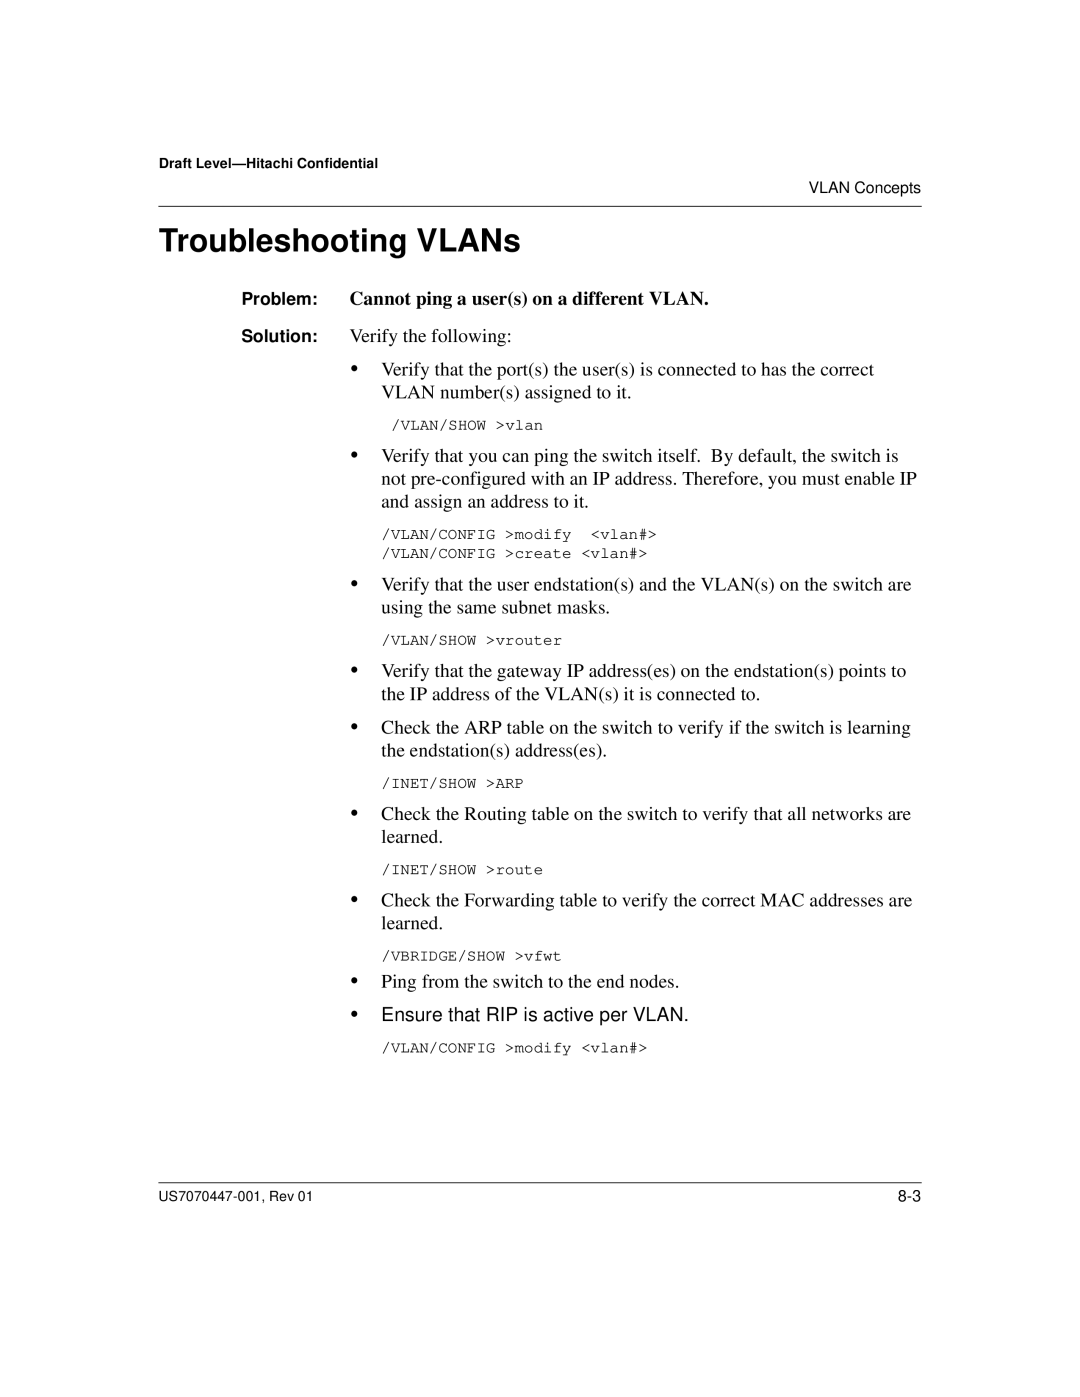 Hitachi US7070447-001 manual Troubleshooting VLANs, Problem Cannot ping a users on a different VLAN 